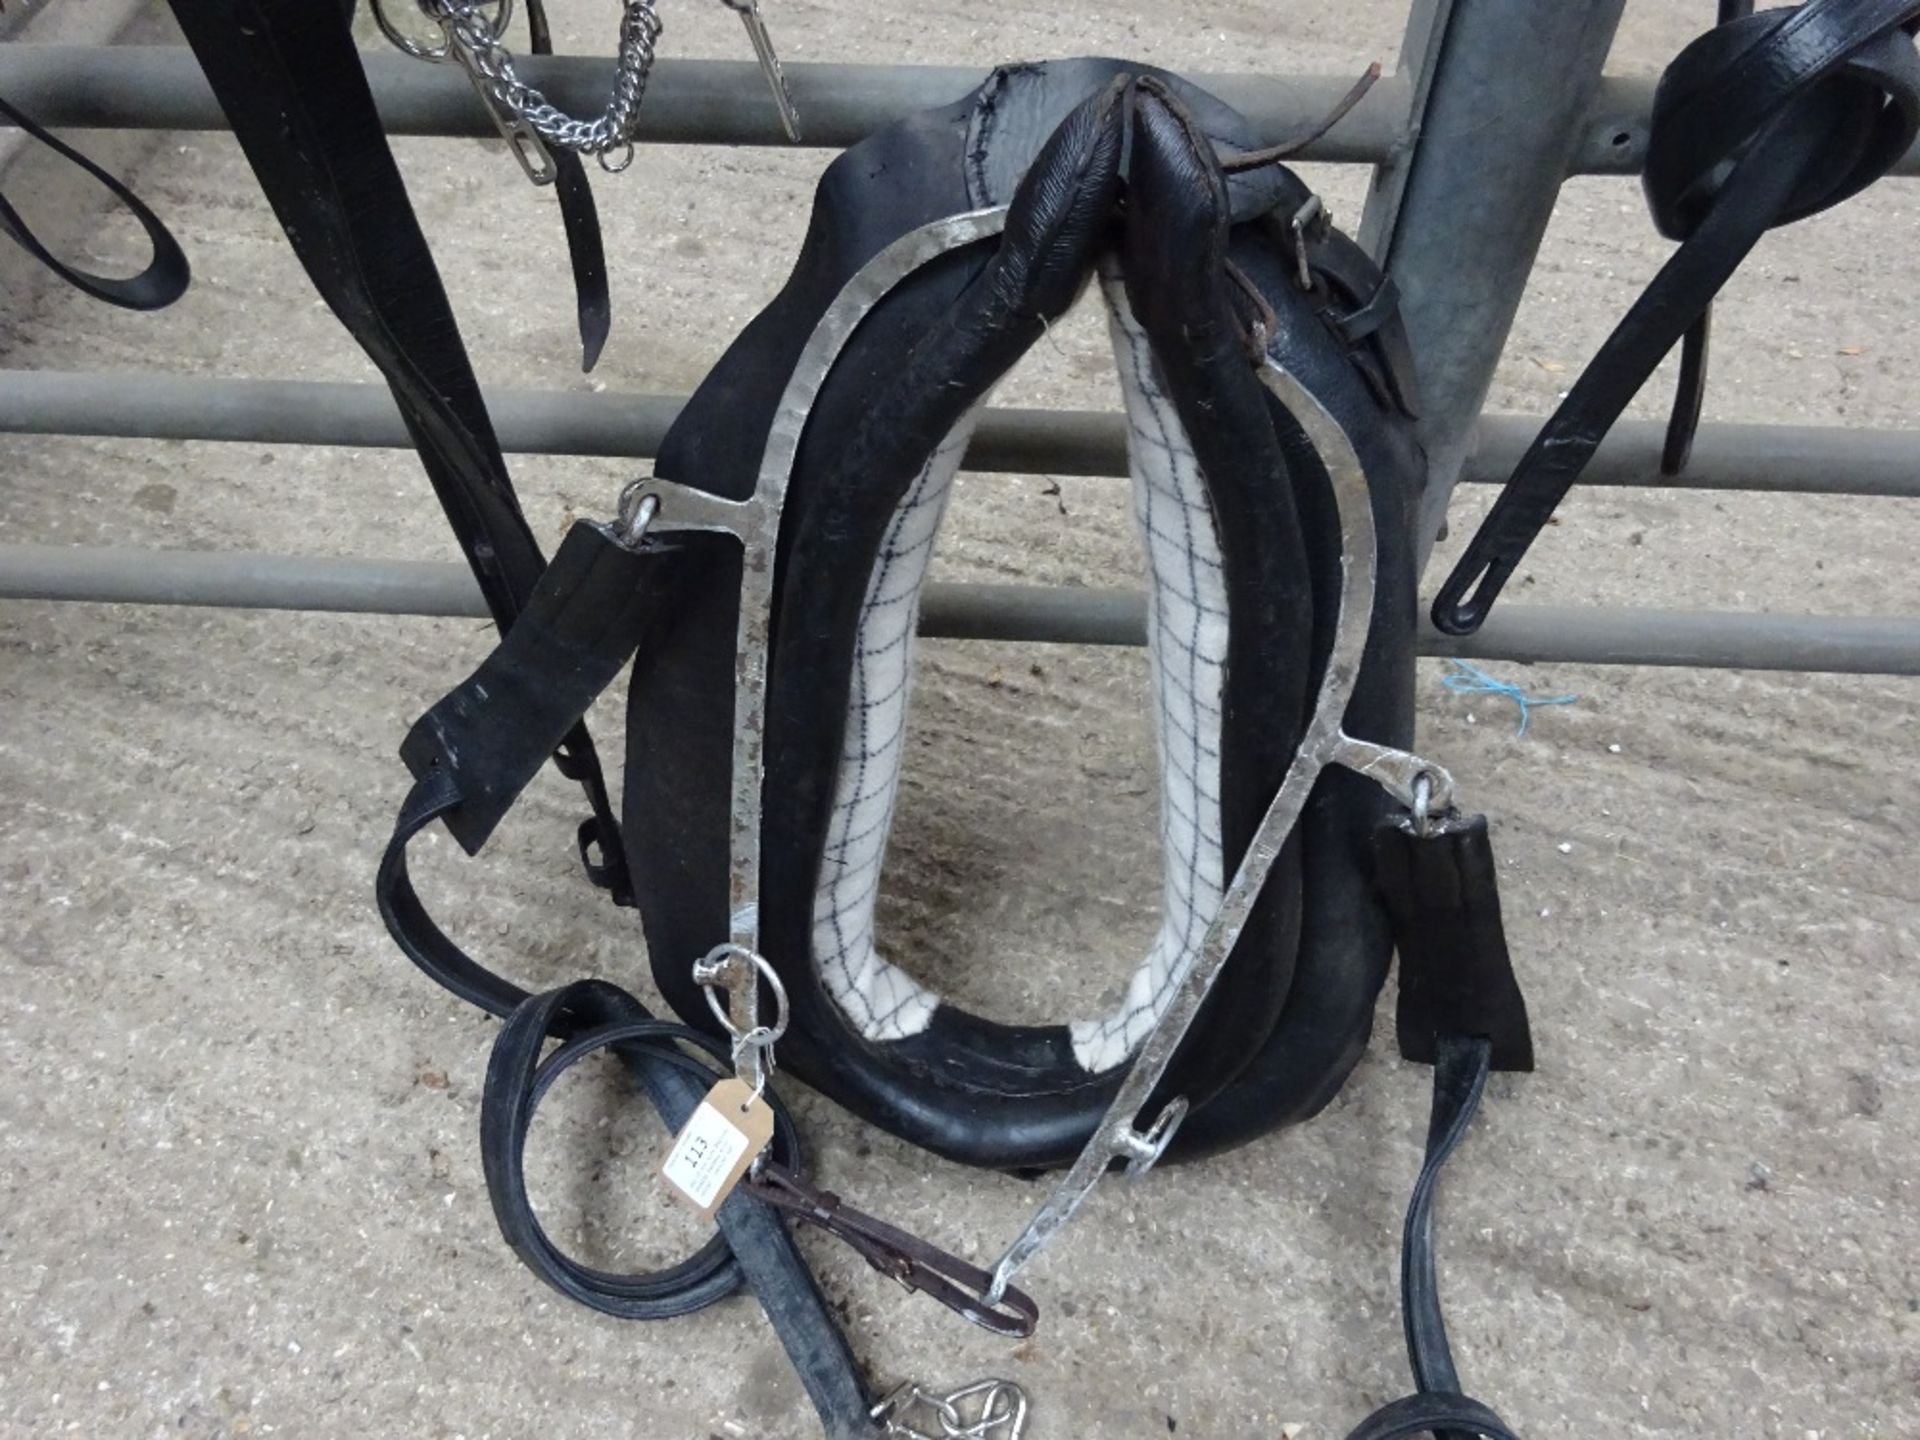 Set of cob size English working harness with collar approx. 21 x 8 inches - carries VAT